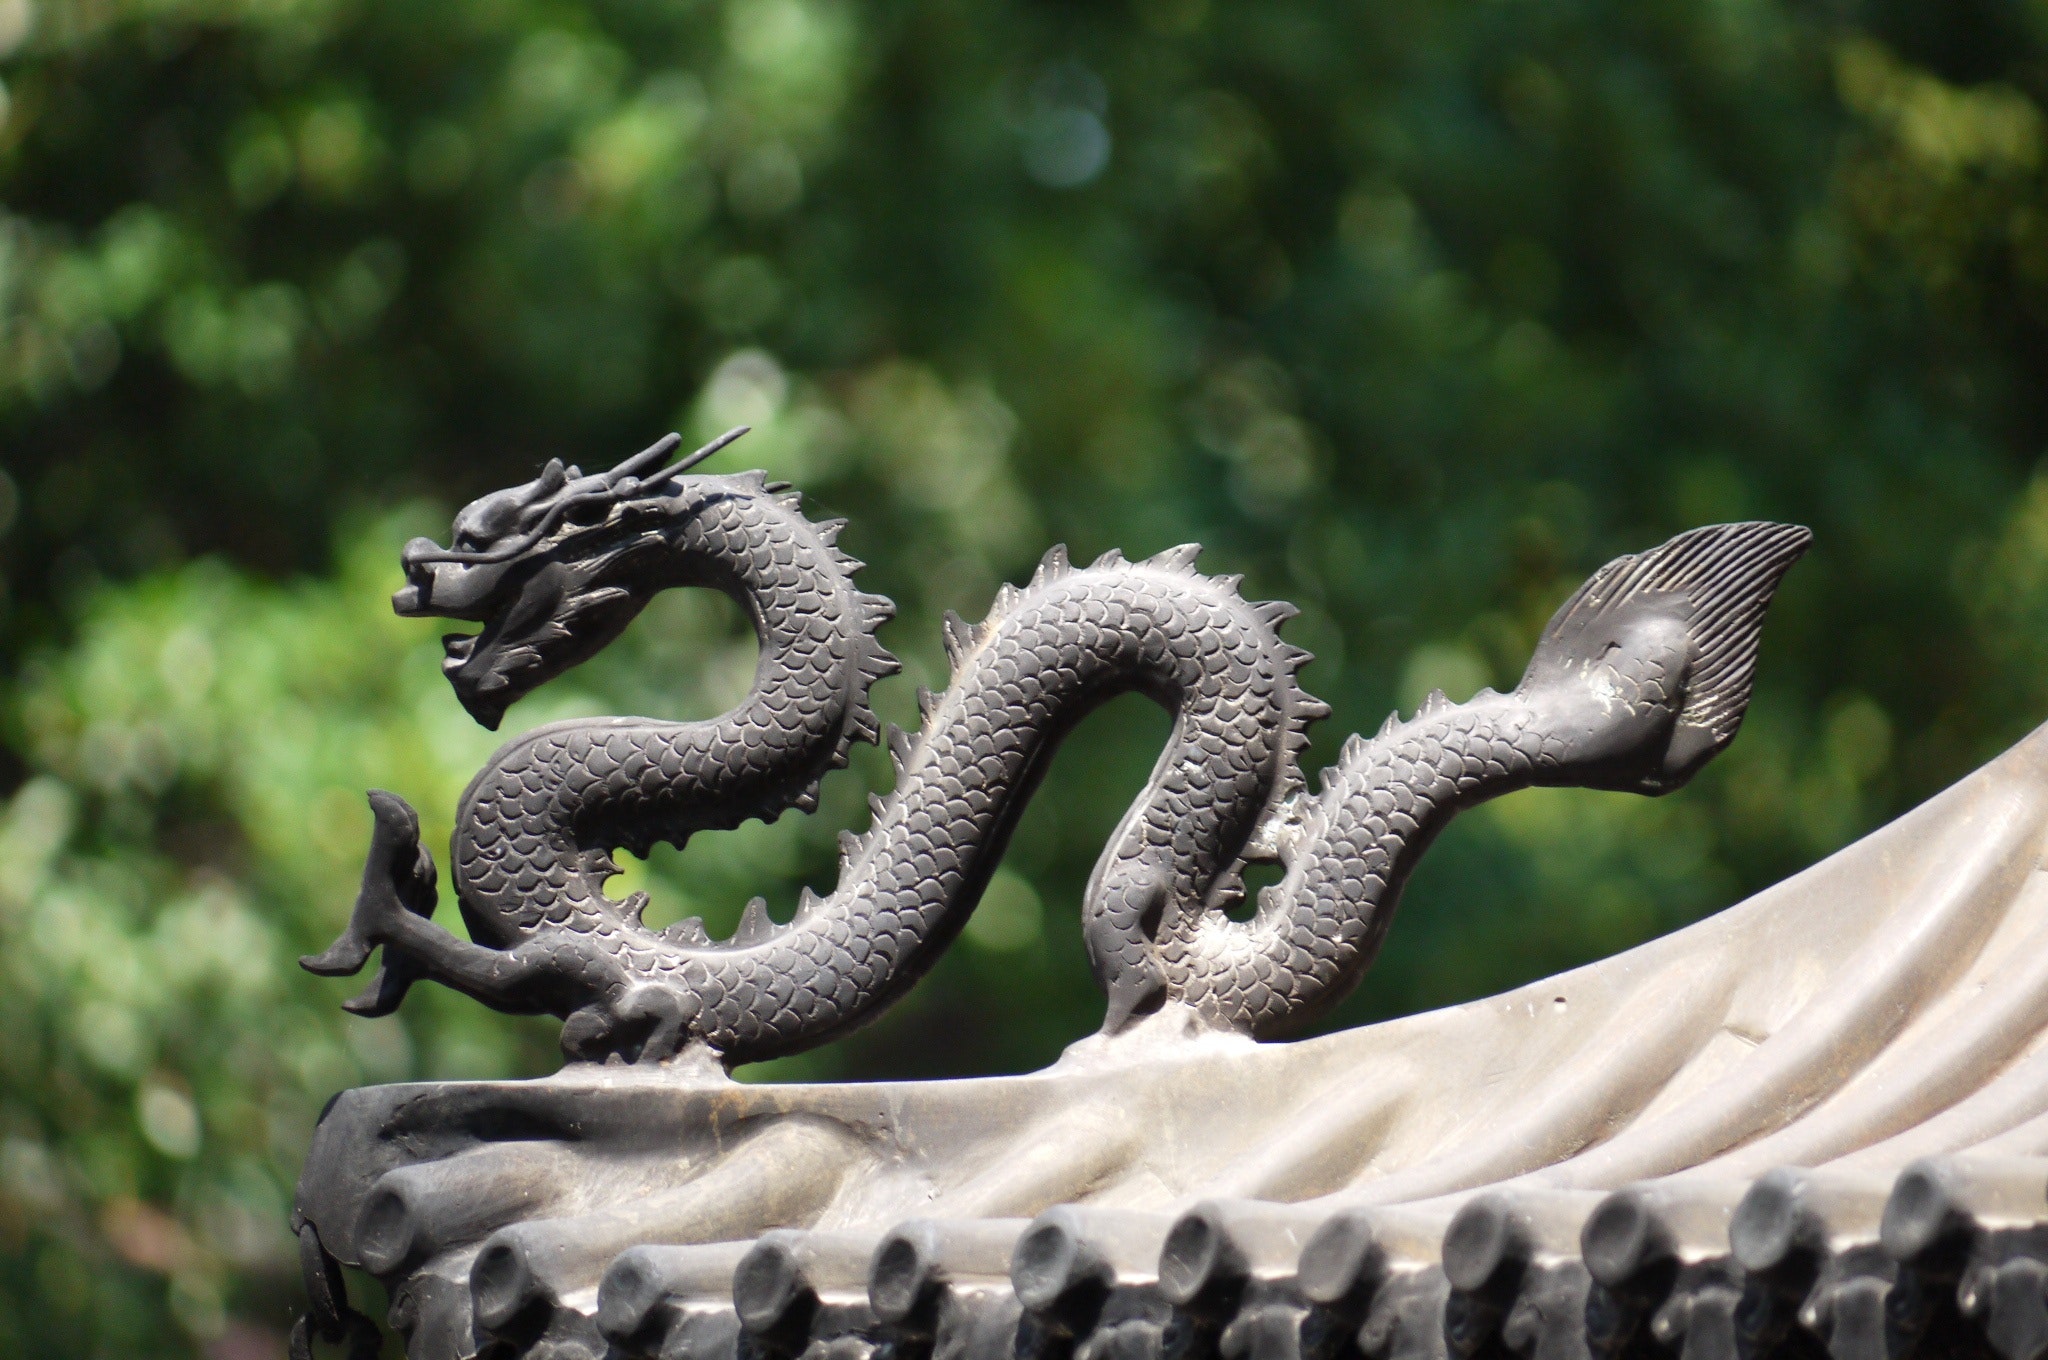 5 Mythical Dragon Figures From Around the World